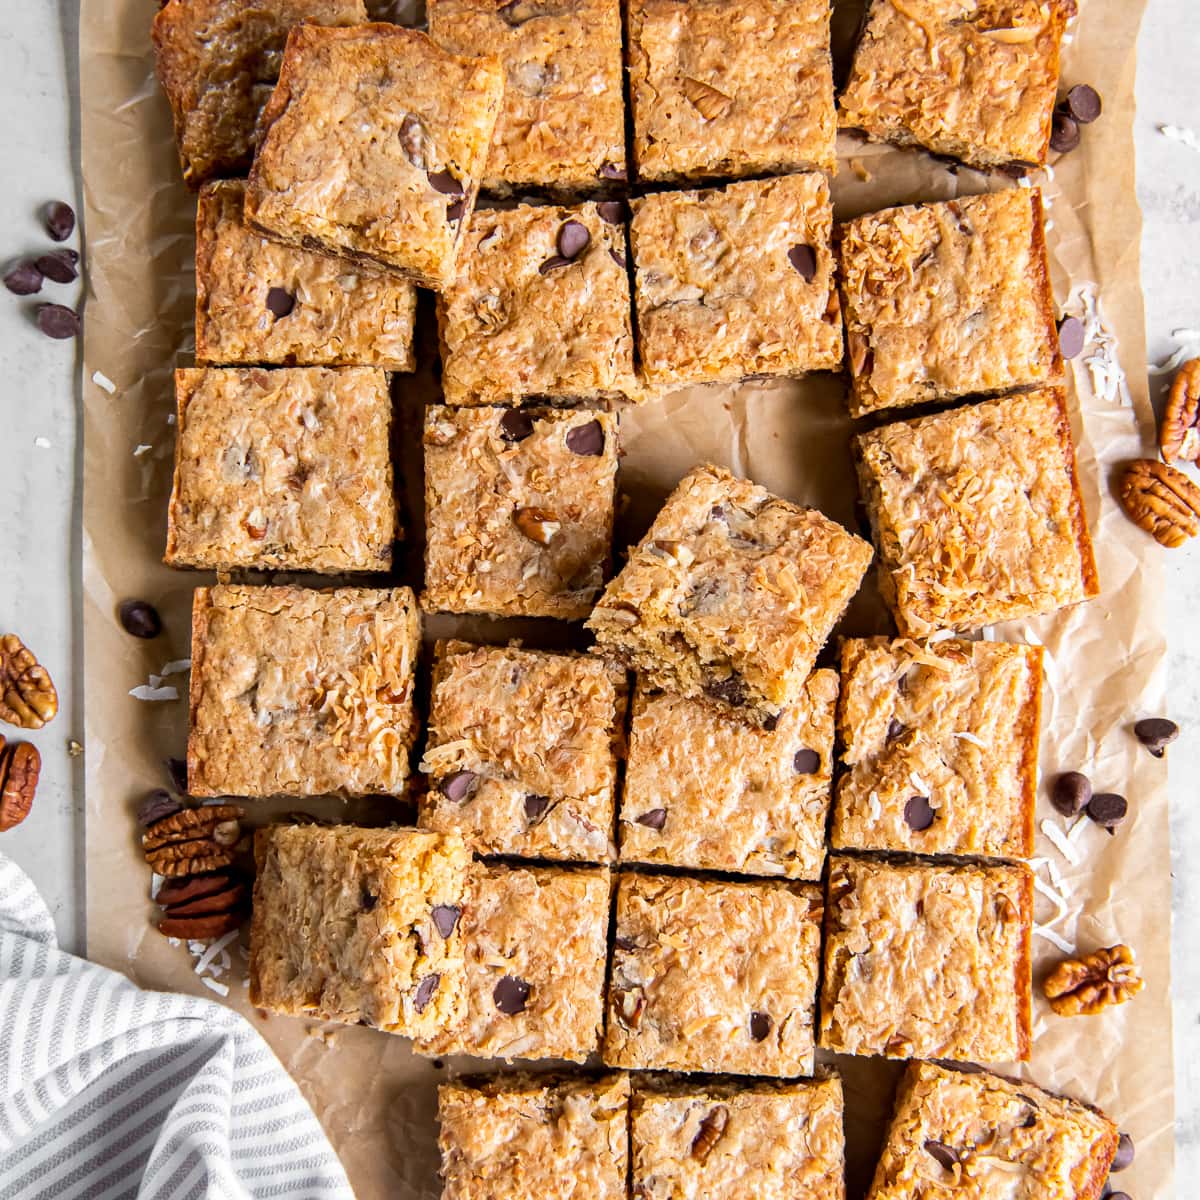 congo bars cut in squares on parchment paper with pecans and chocolate chips.